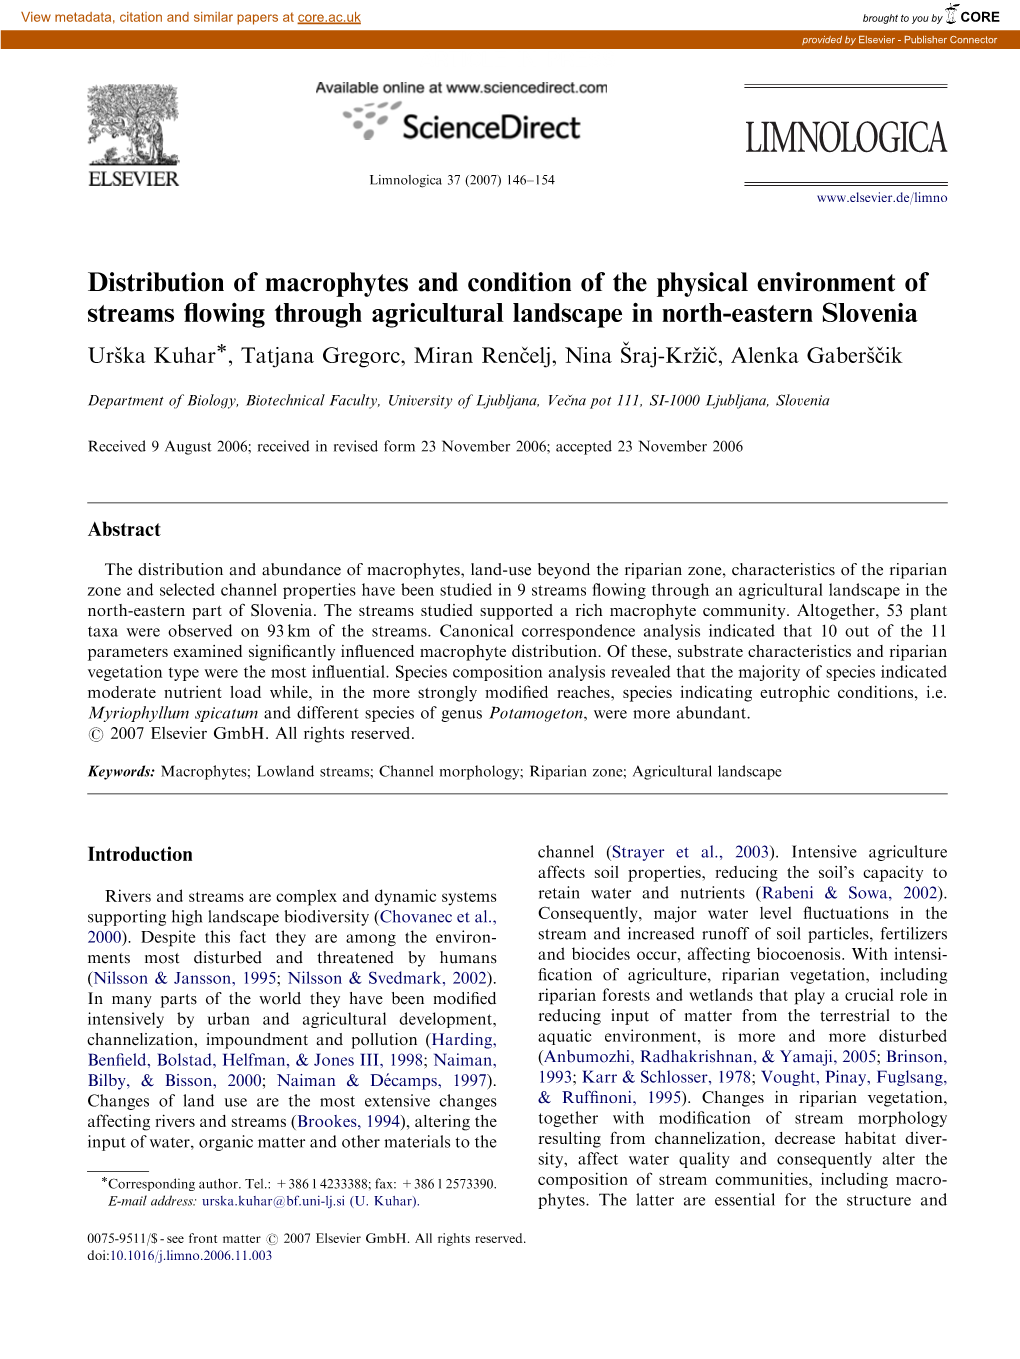 Distribution of Macrophytes and Condition of the Physical